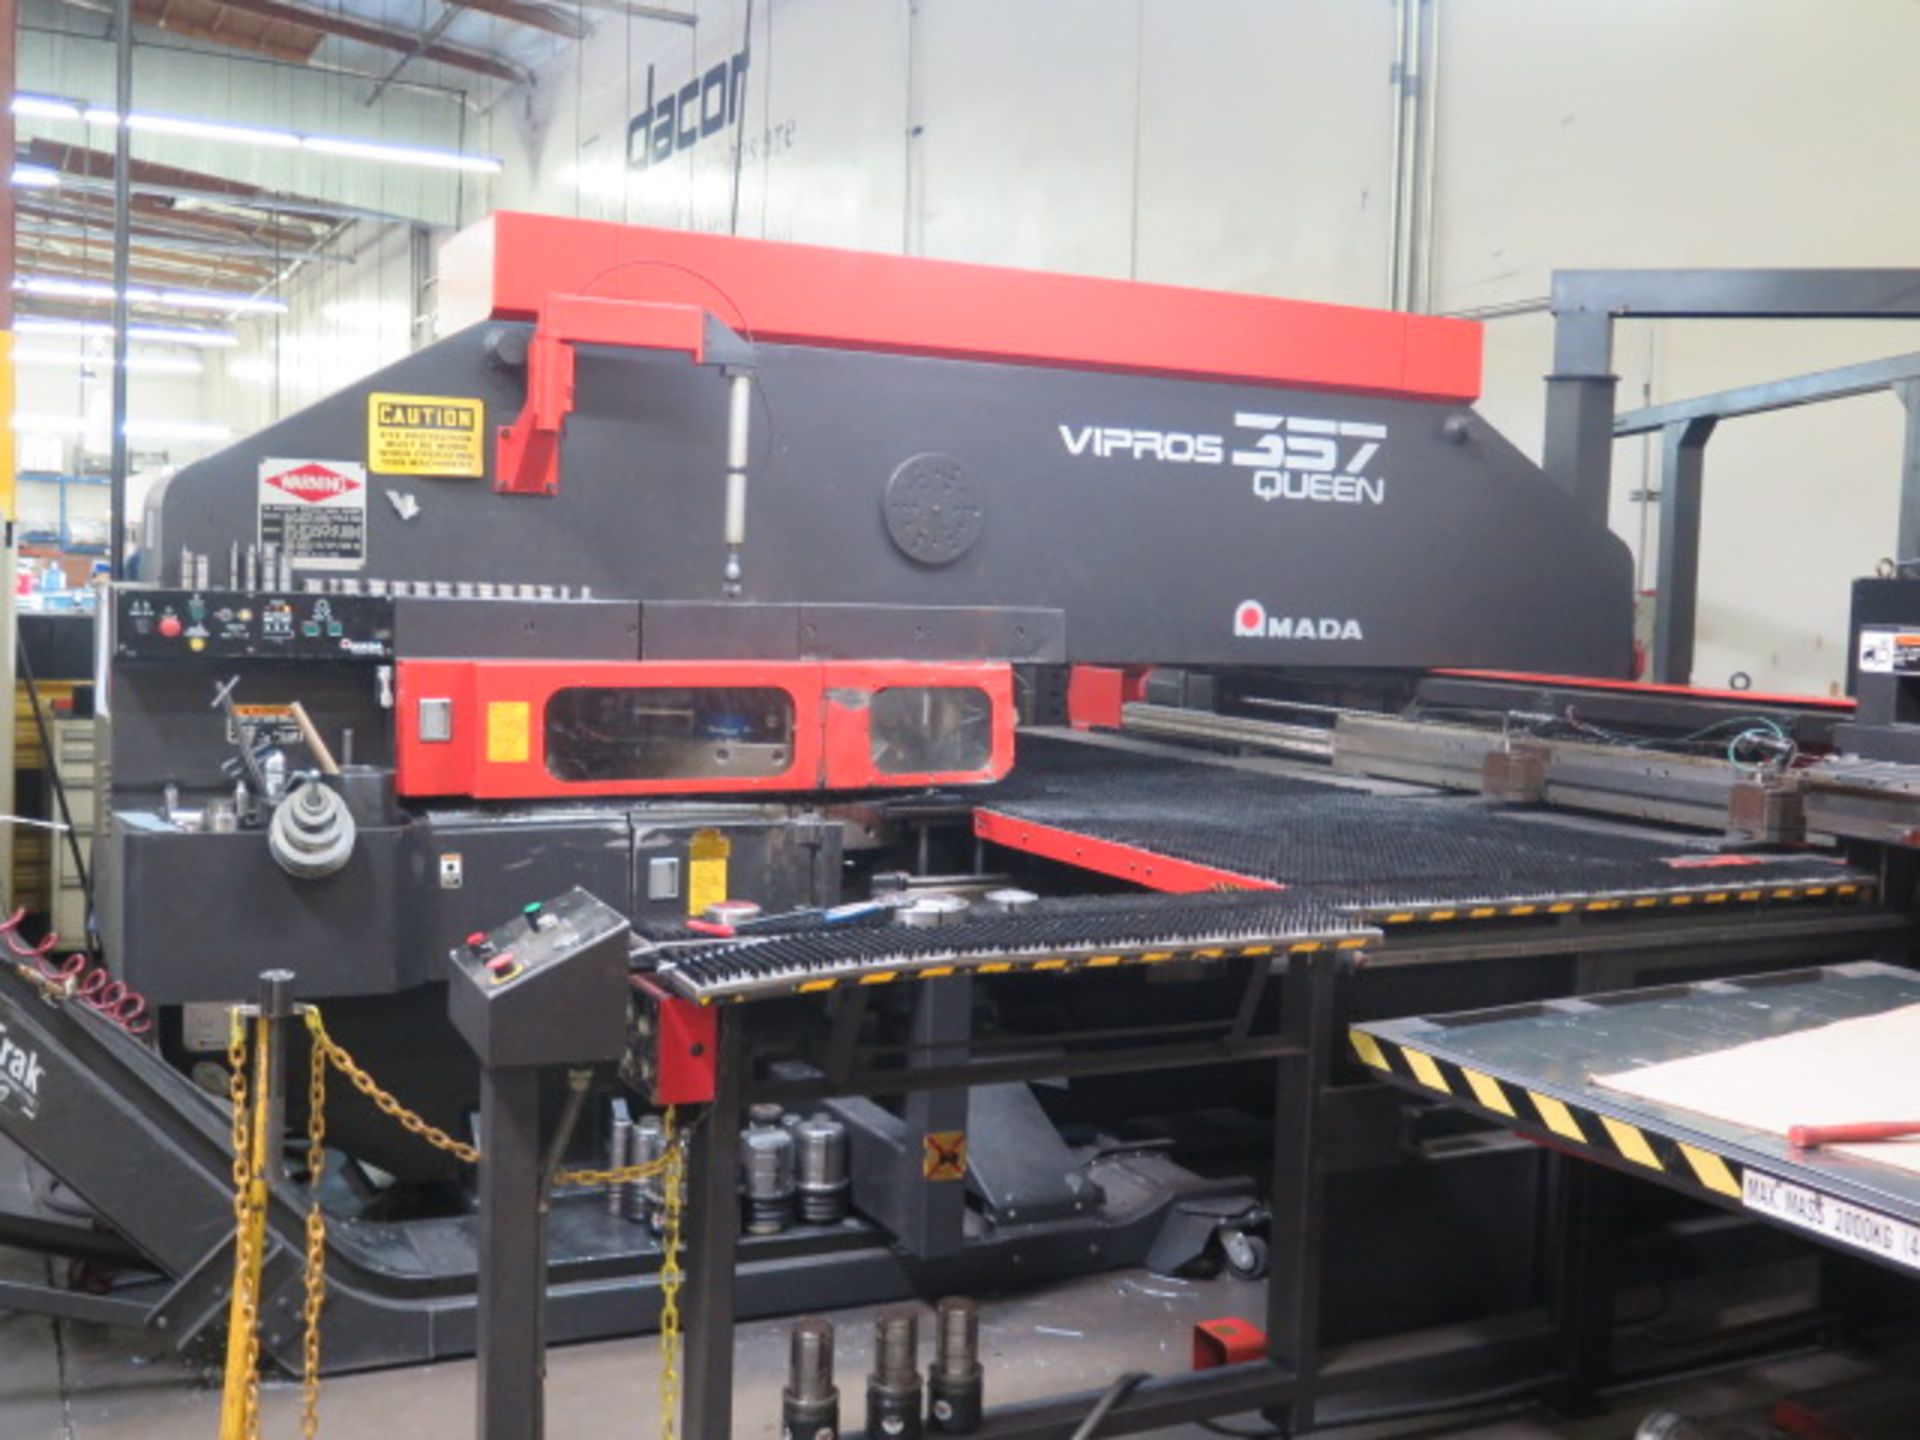 1998 Amada VIPROS 357 QUEEN 30 Ton CNC Turret Punch Press s/n 35730345 w/ O4P-C Controls, SOLD AS IS - Image 2 of 30